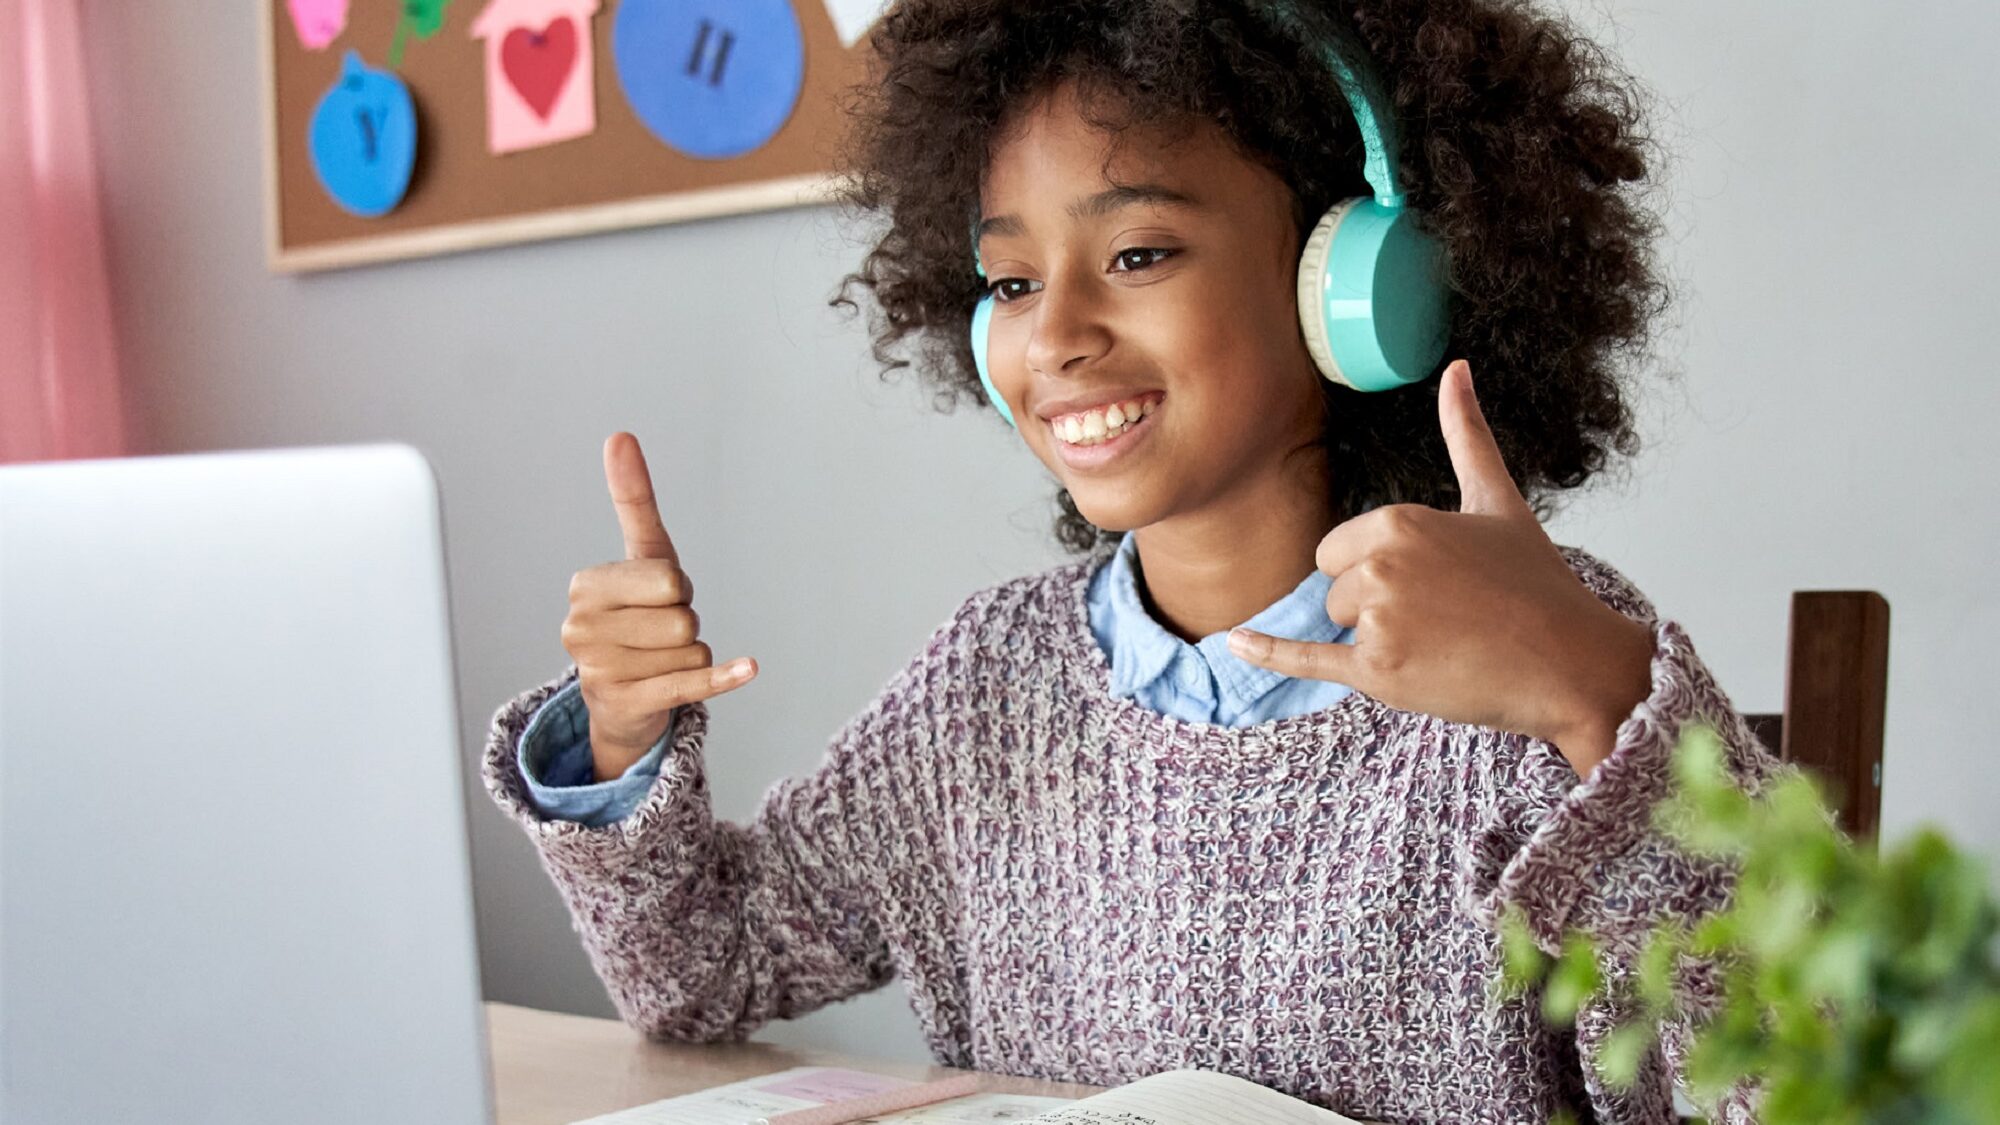 child sitting at desk with headphones on smiling and making gesture at laptop